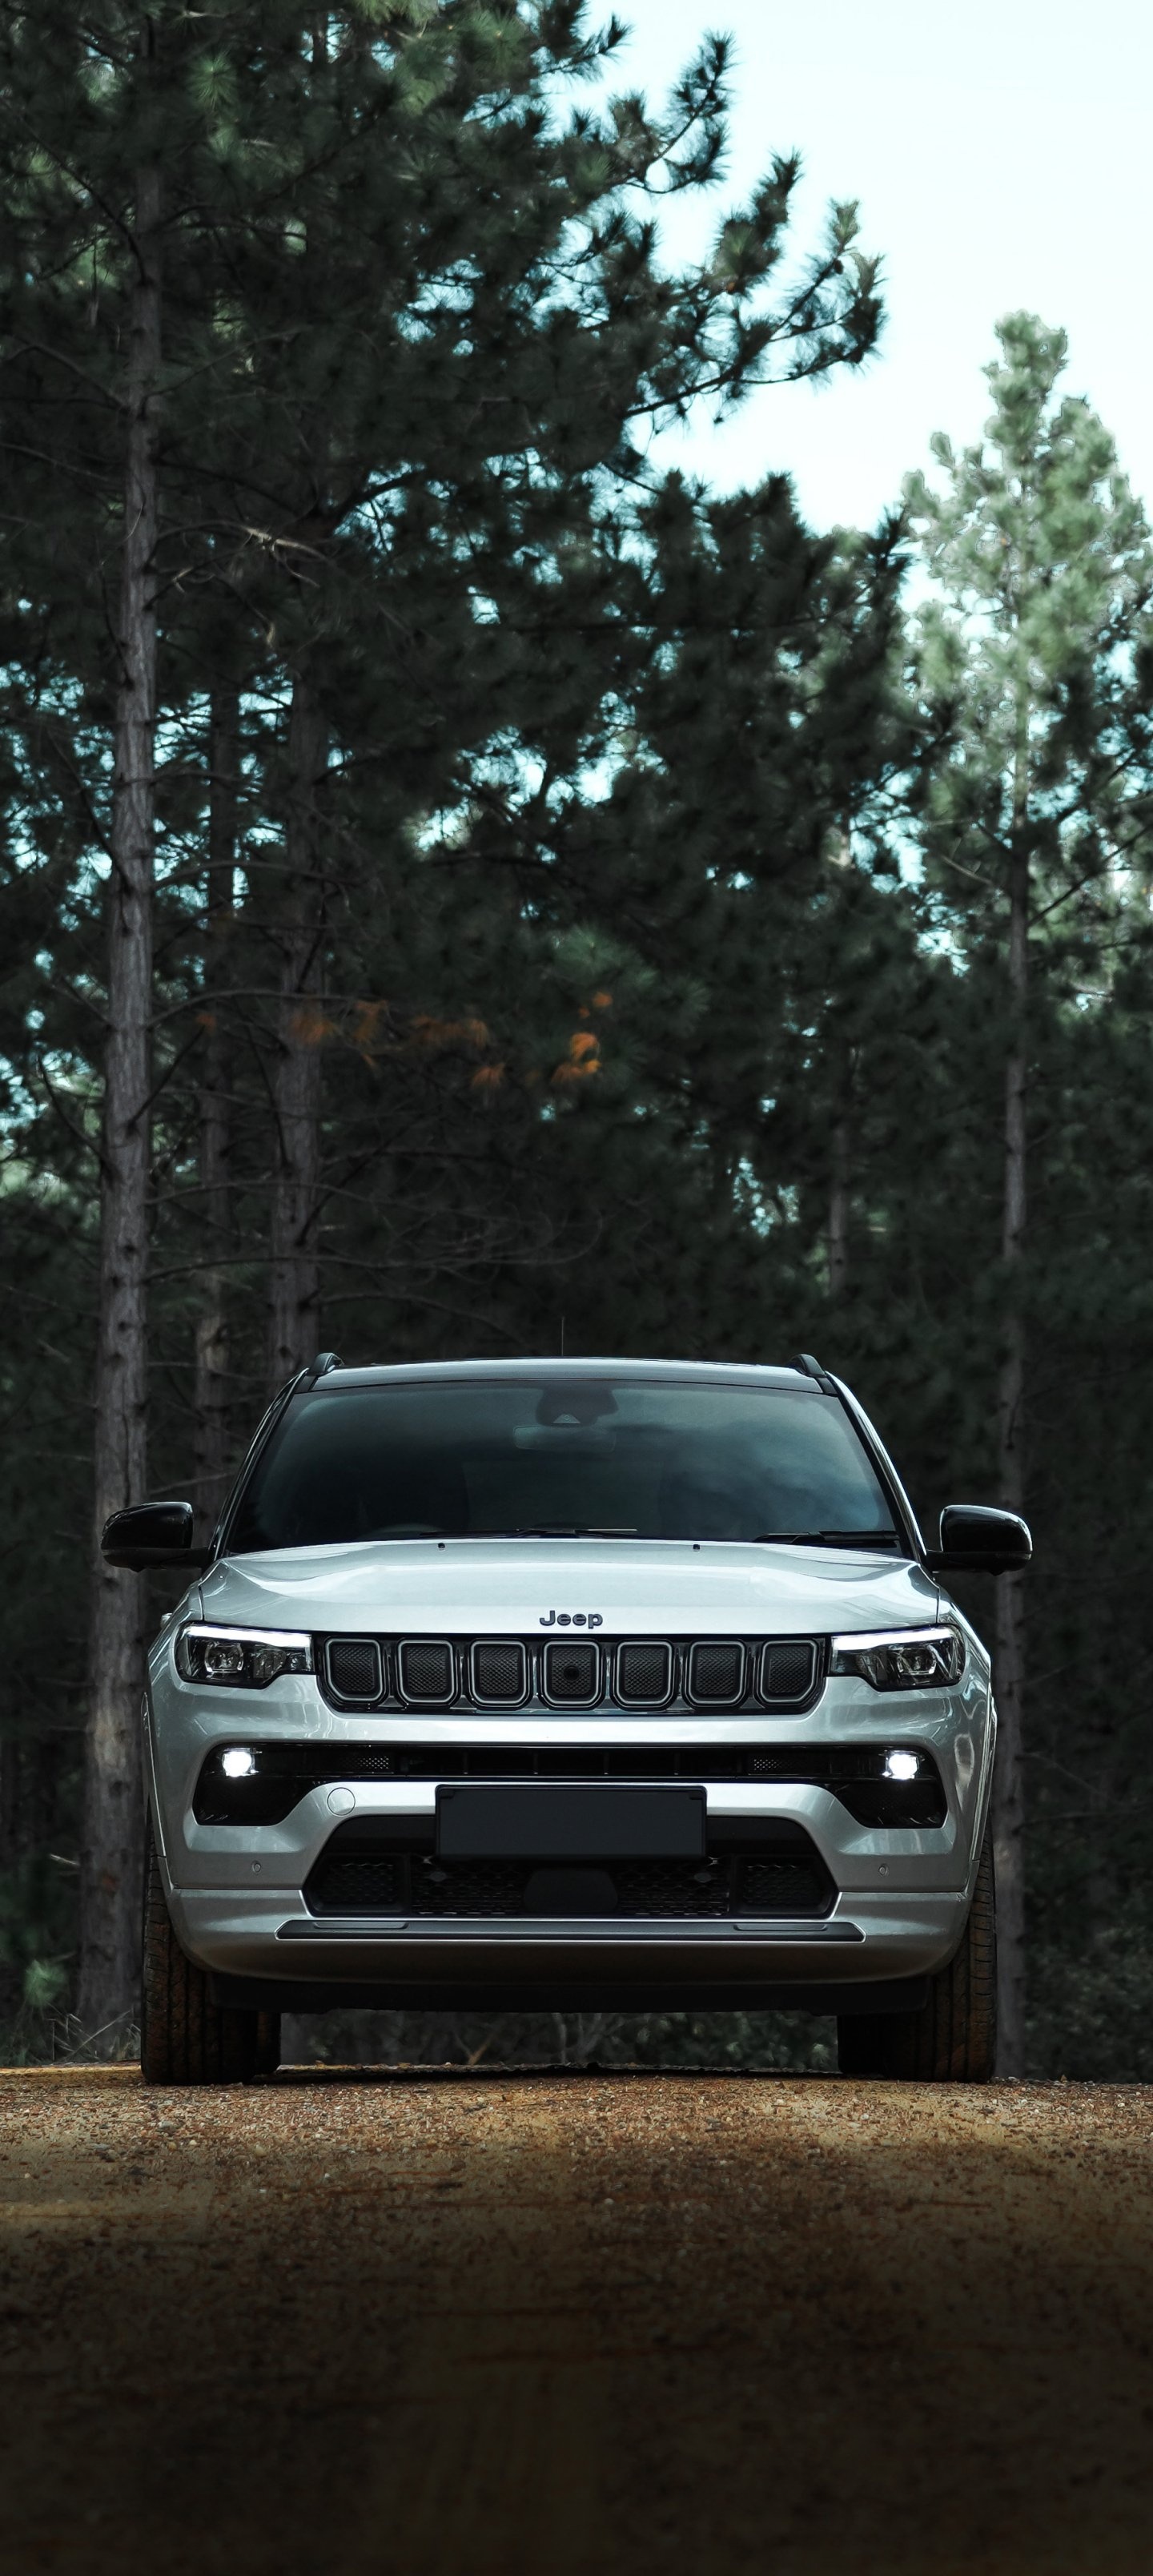 Jeep Compass, SUV vehicles, Off-road capabilities, Adventure-ready, 1440x3220 HD Phone